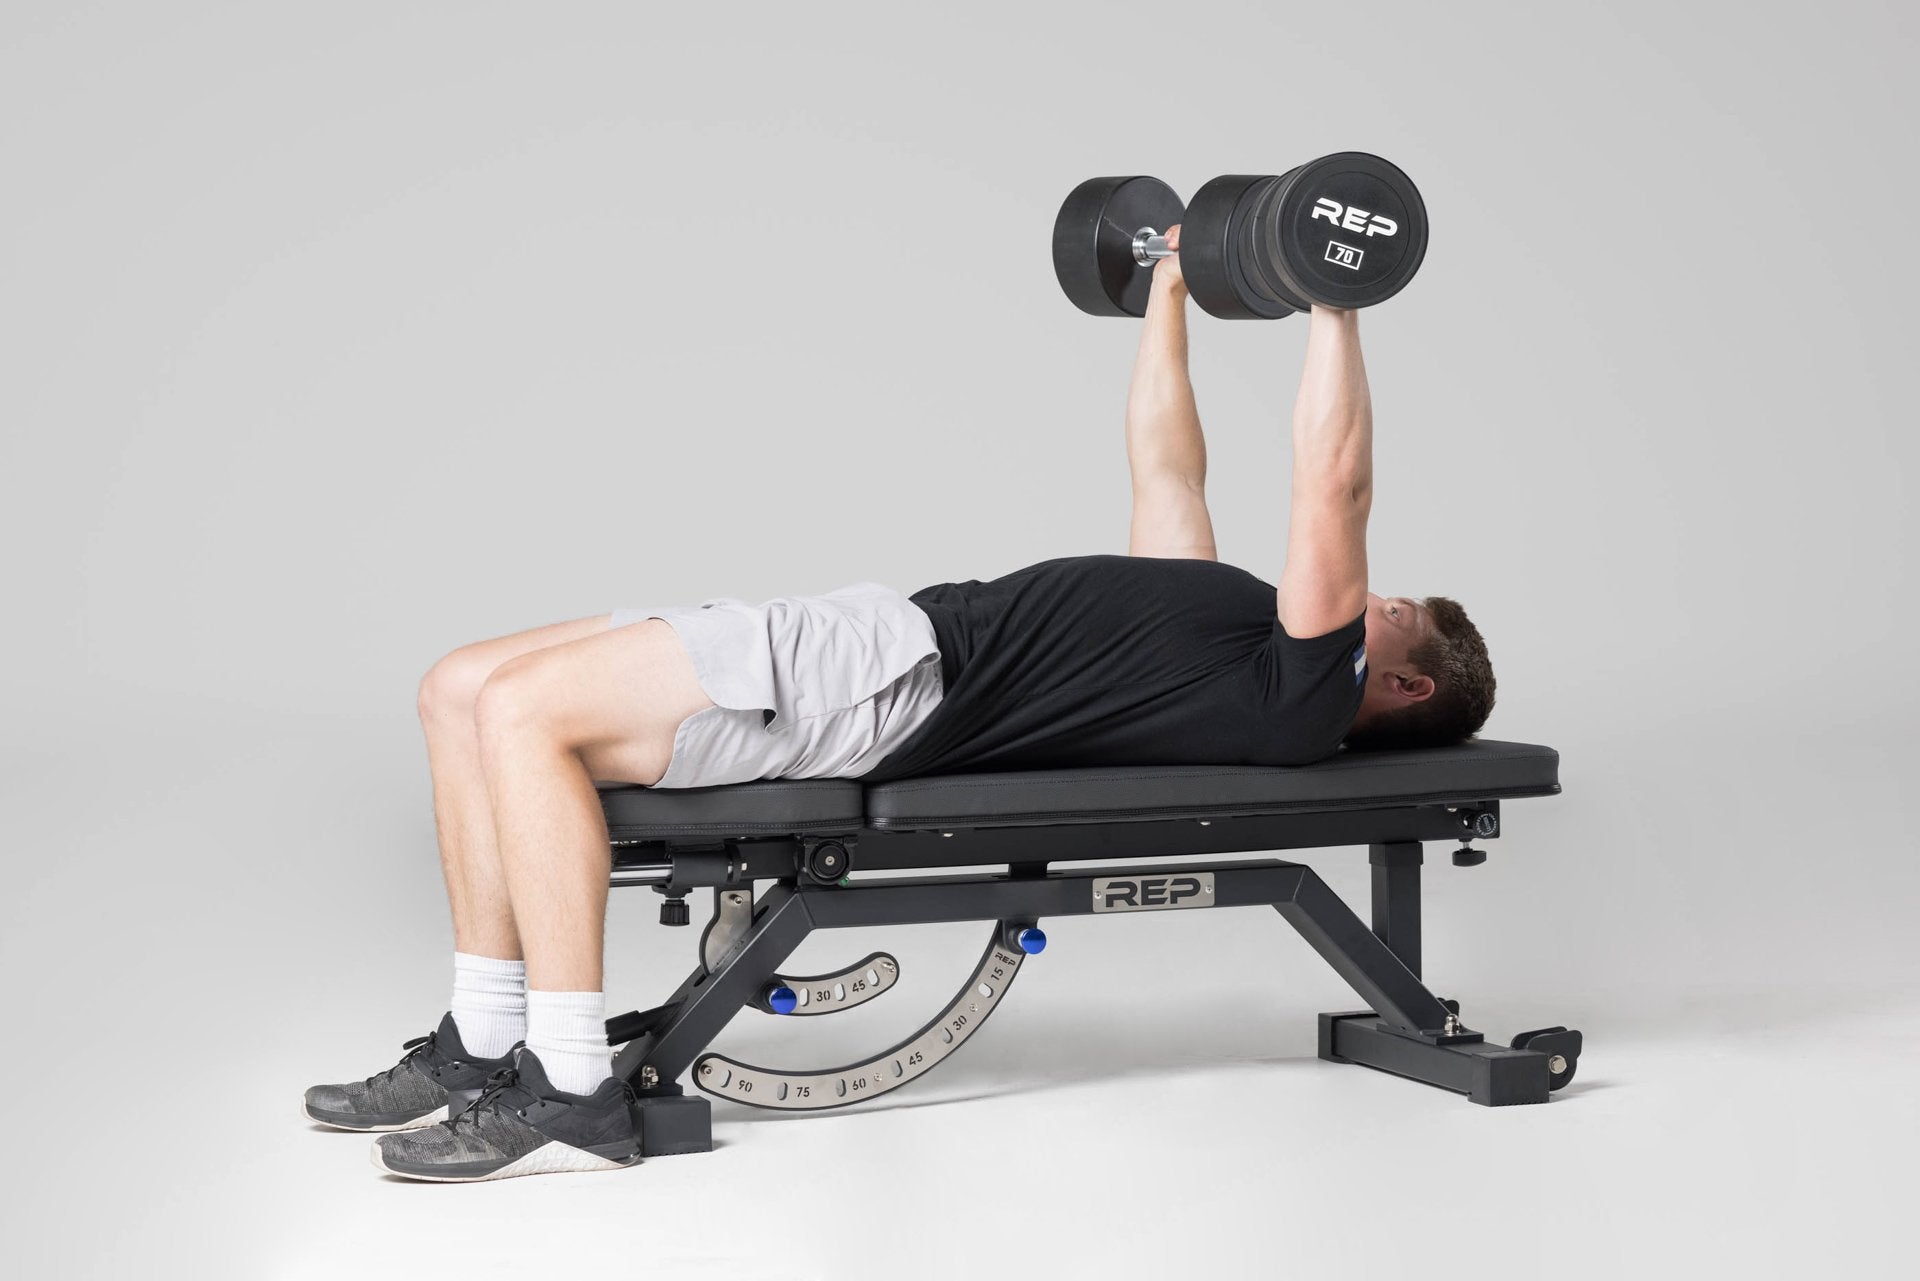 Lifter performing a bench press on an AB-5000 bench with a pair of 70lb Urethane Dumbbells.